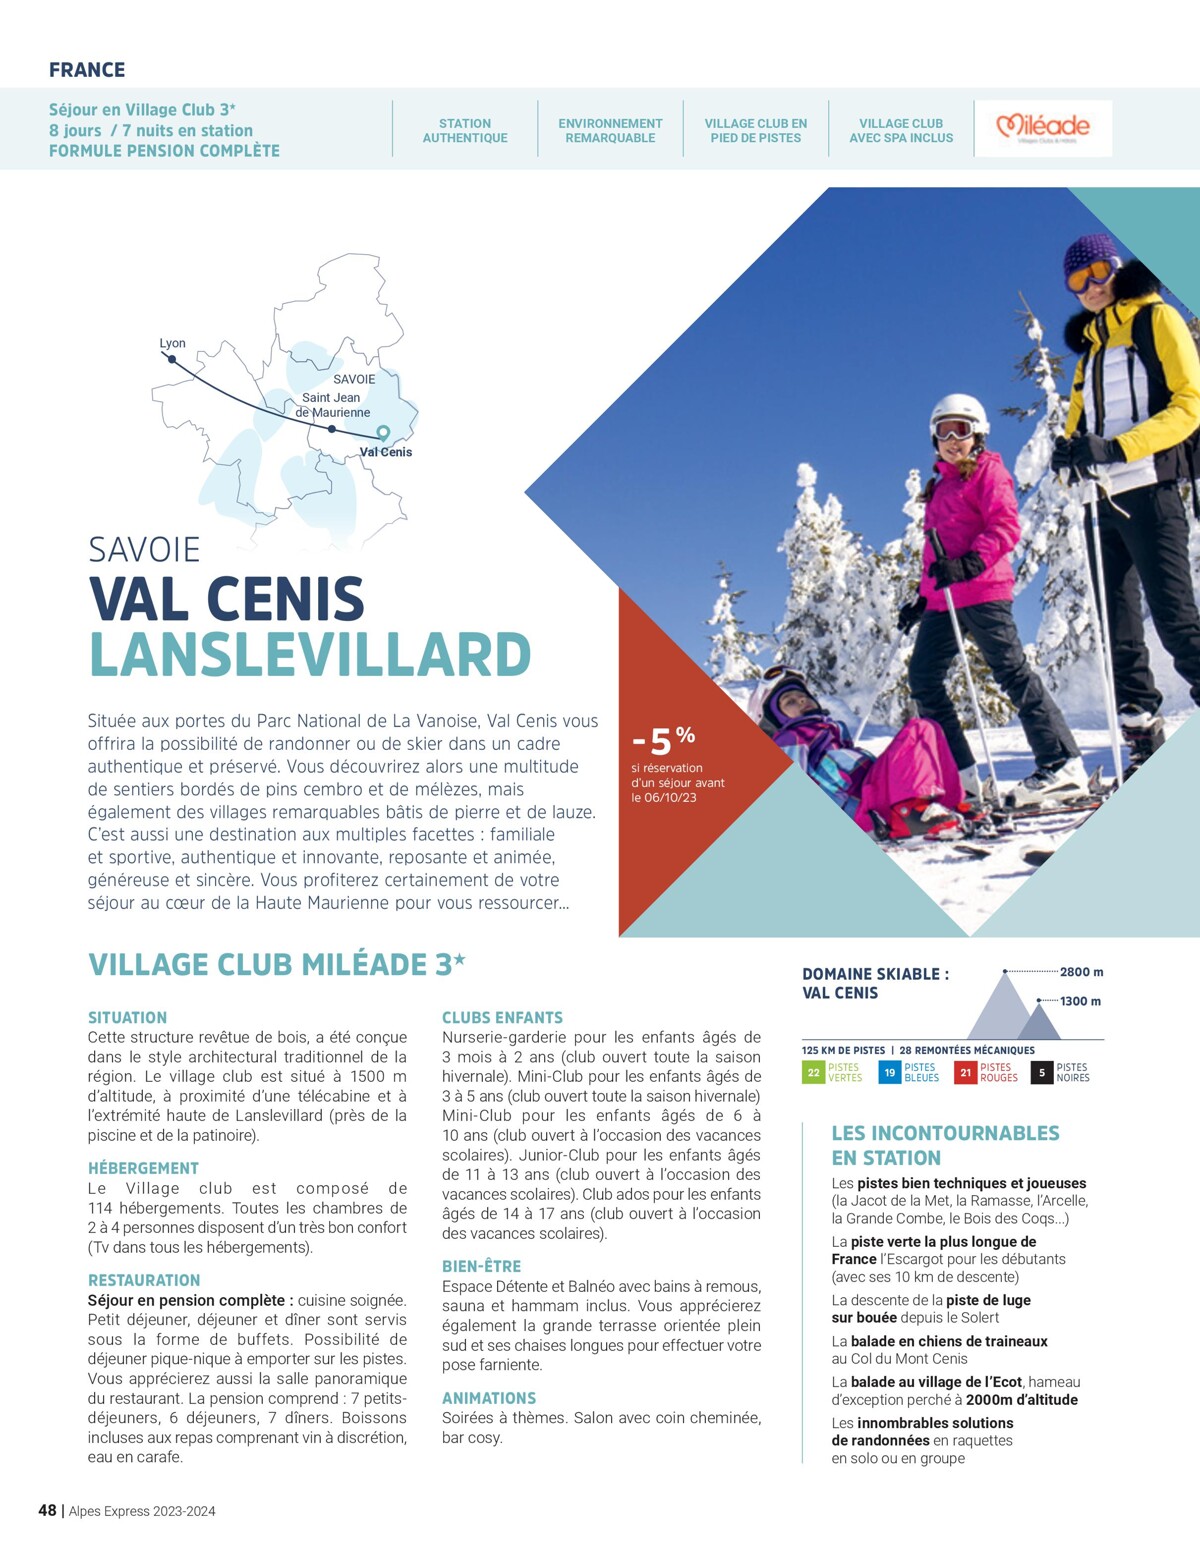 Catalogue Alpes express hiver 2023-2024, page 00048